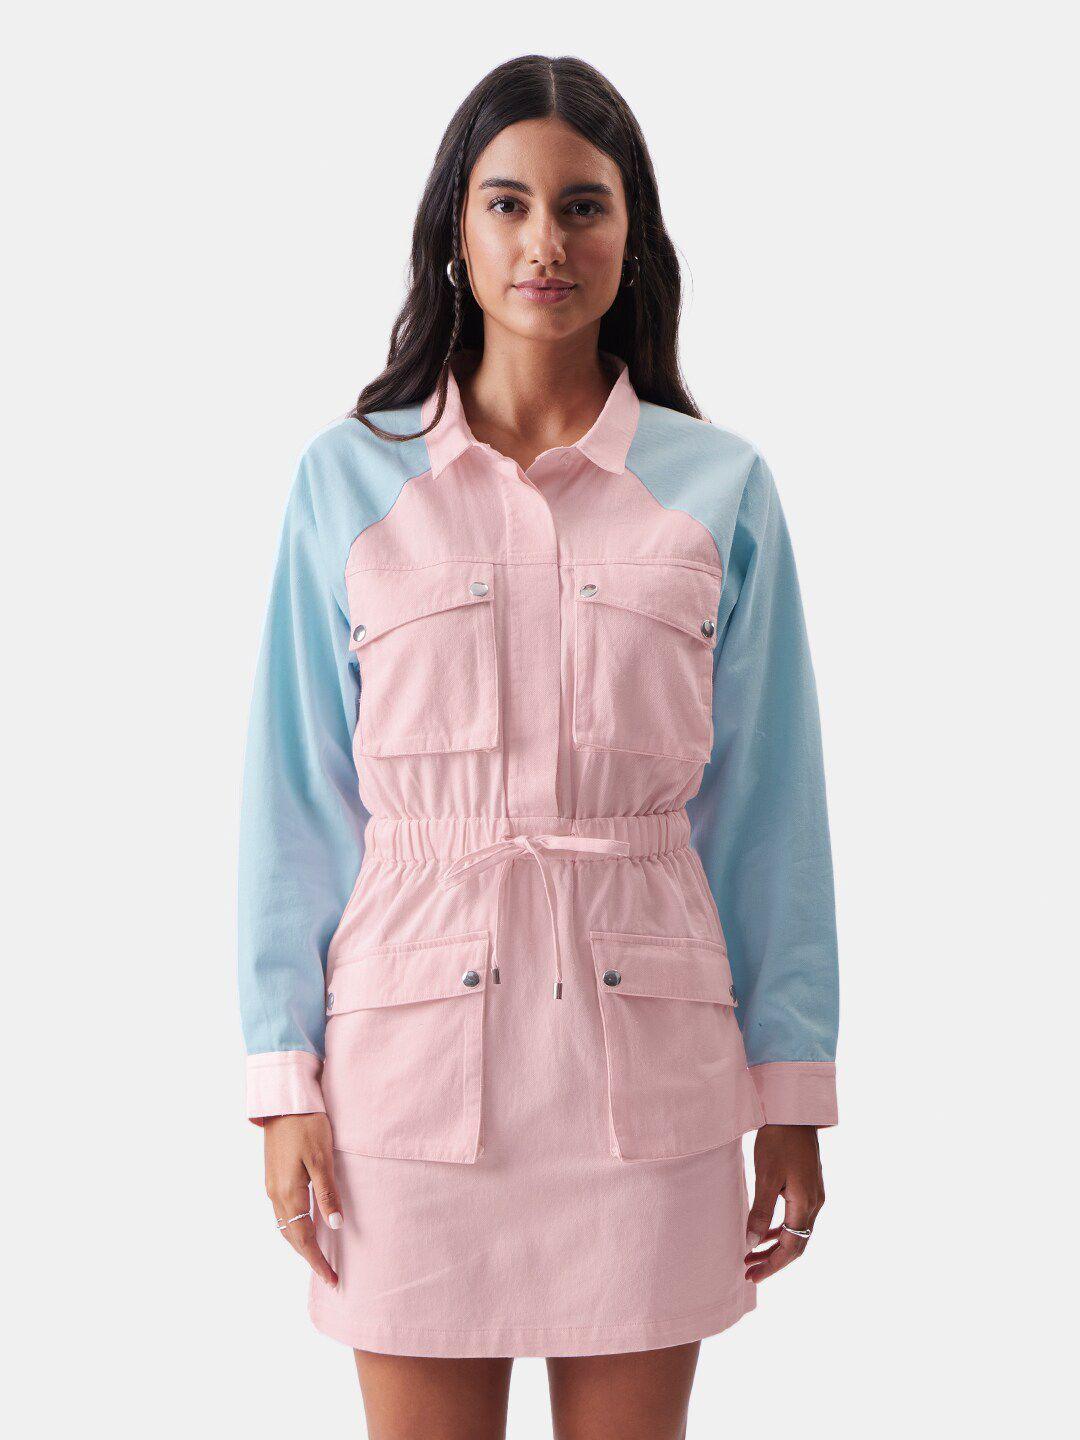 the souled store pink & blue colourblocked cuffed sleeves pure cotton shirt dress